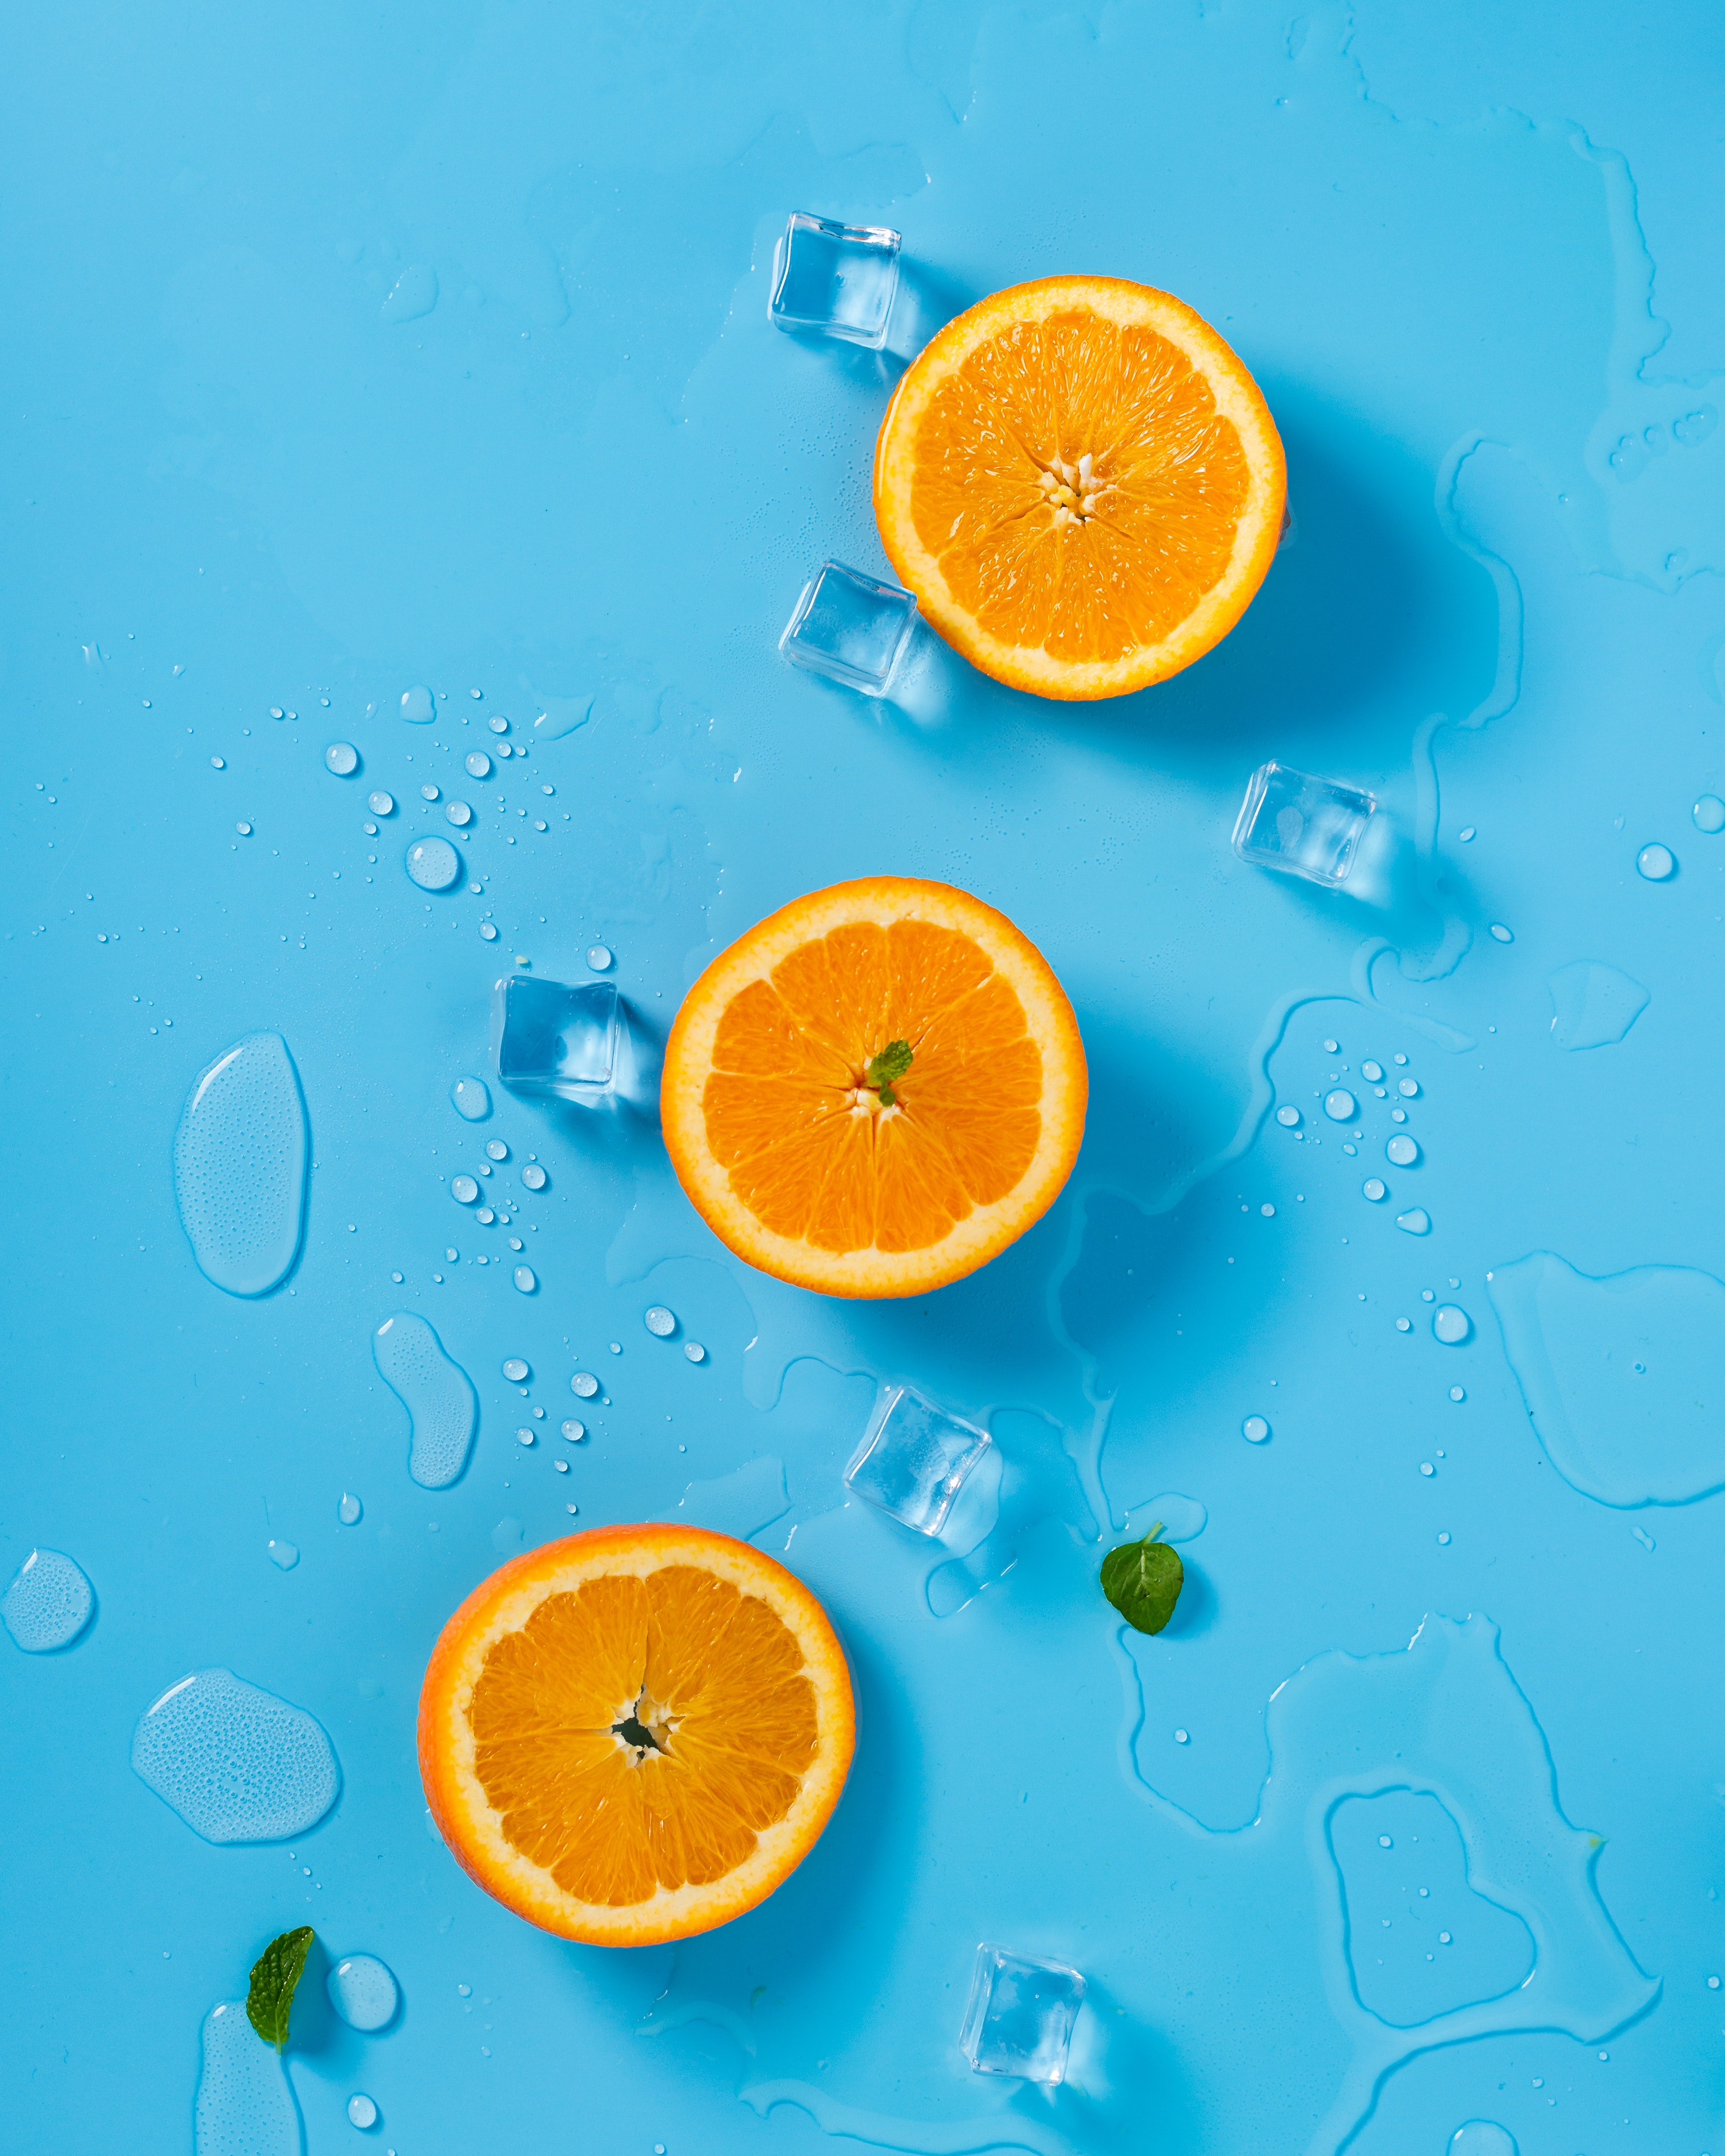 51865 free wallpaper 360x640 for phone, download images rings, melting, food, citrus 360x640 for mobile